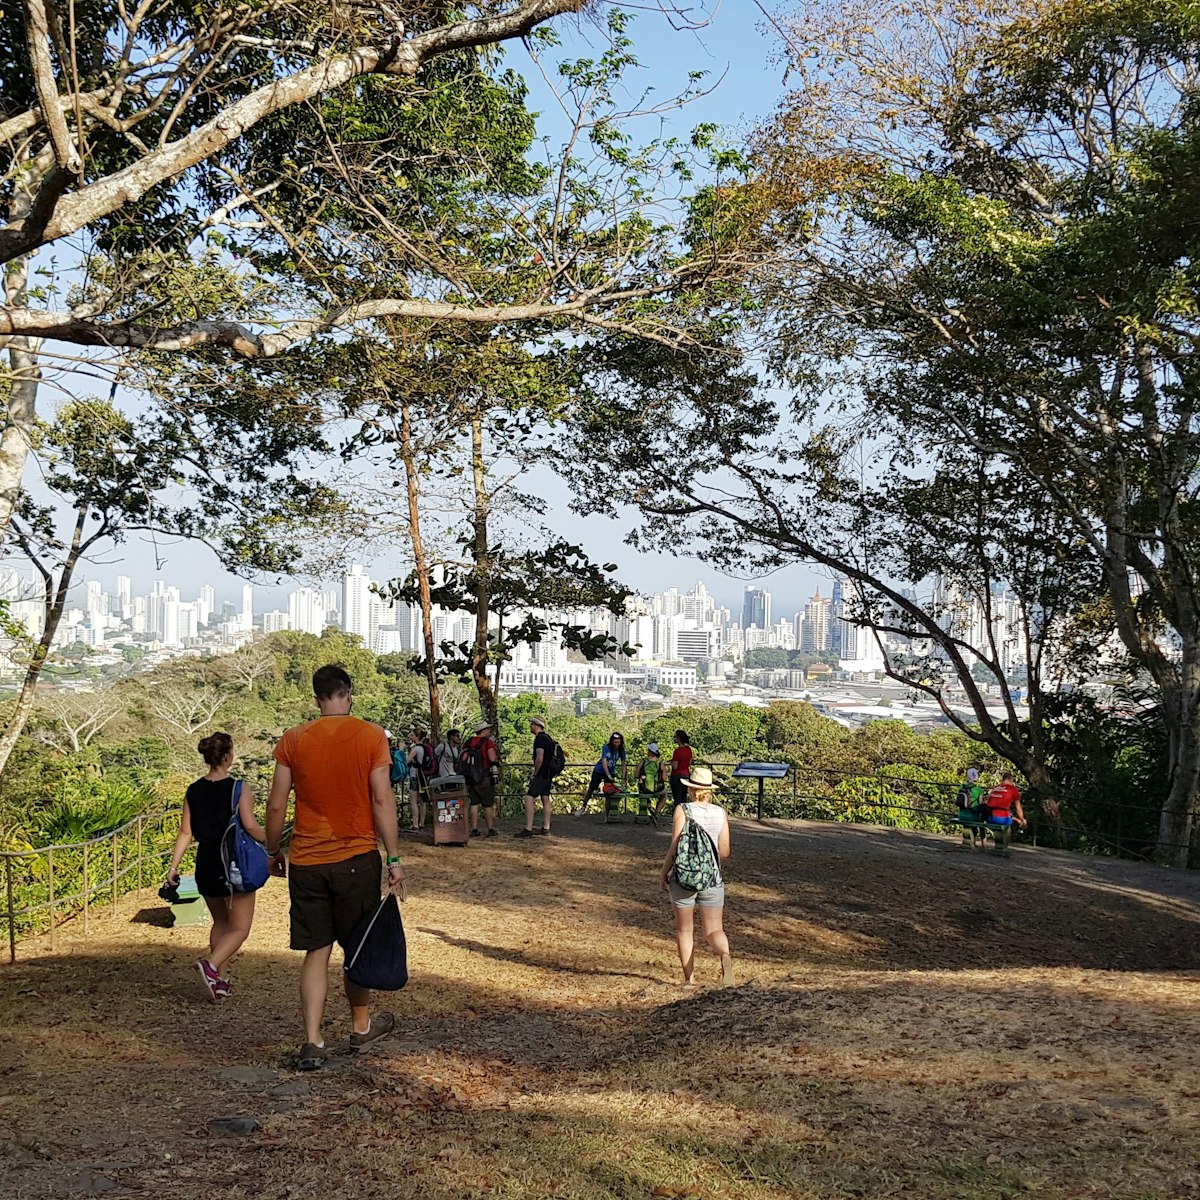 Panama City, Panama - 01/25/2019 People walking towards a view point in the Metropolitan Park in Panama City from which you can see the skyline of the city on a nice and sunny summer day.
Parque Natural Metropolitano
